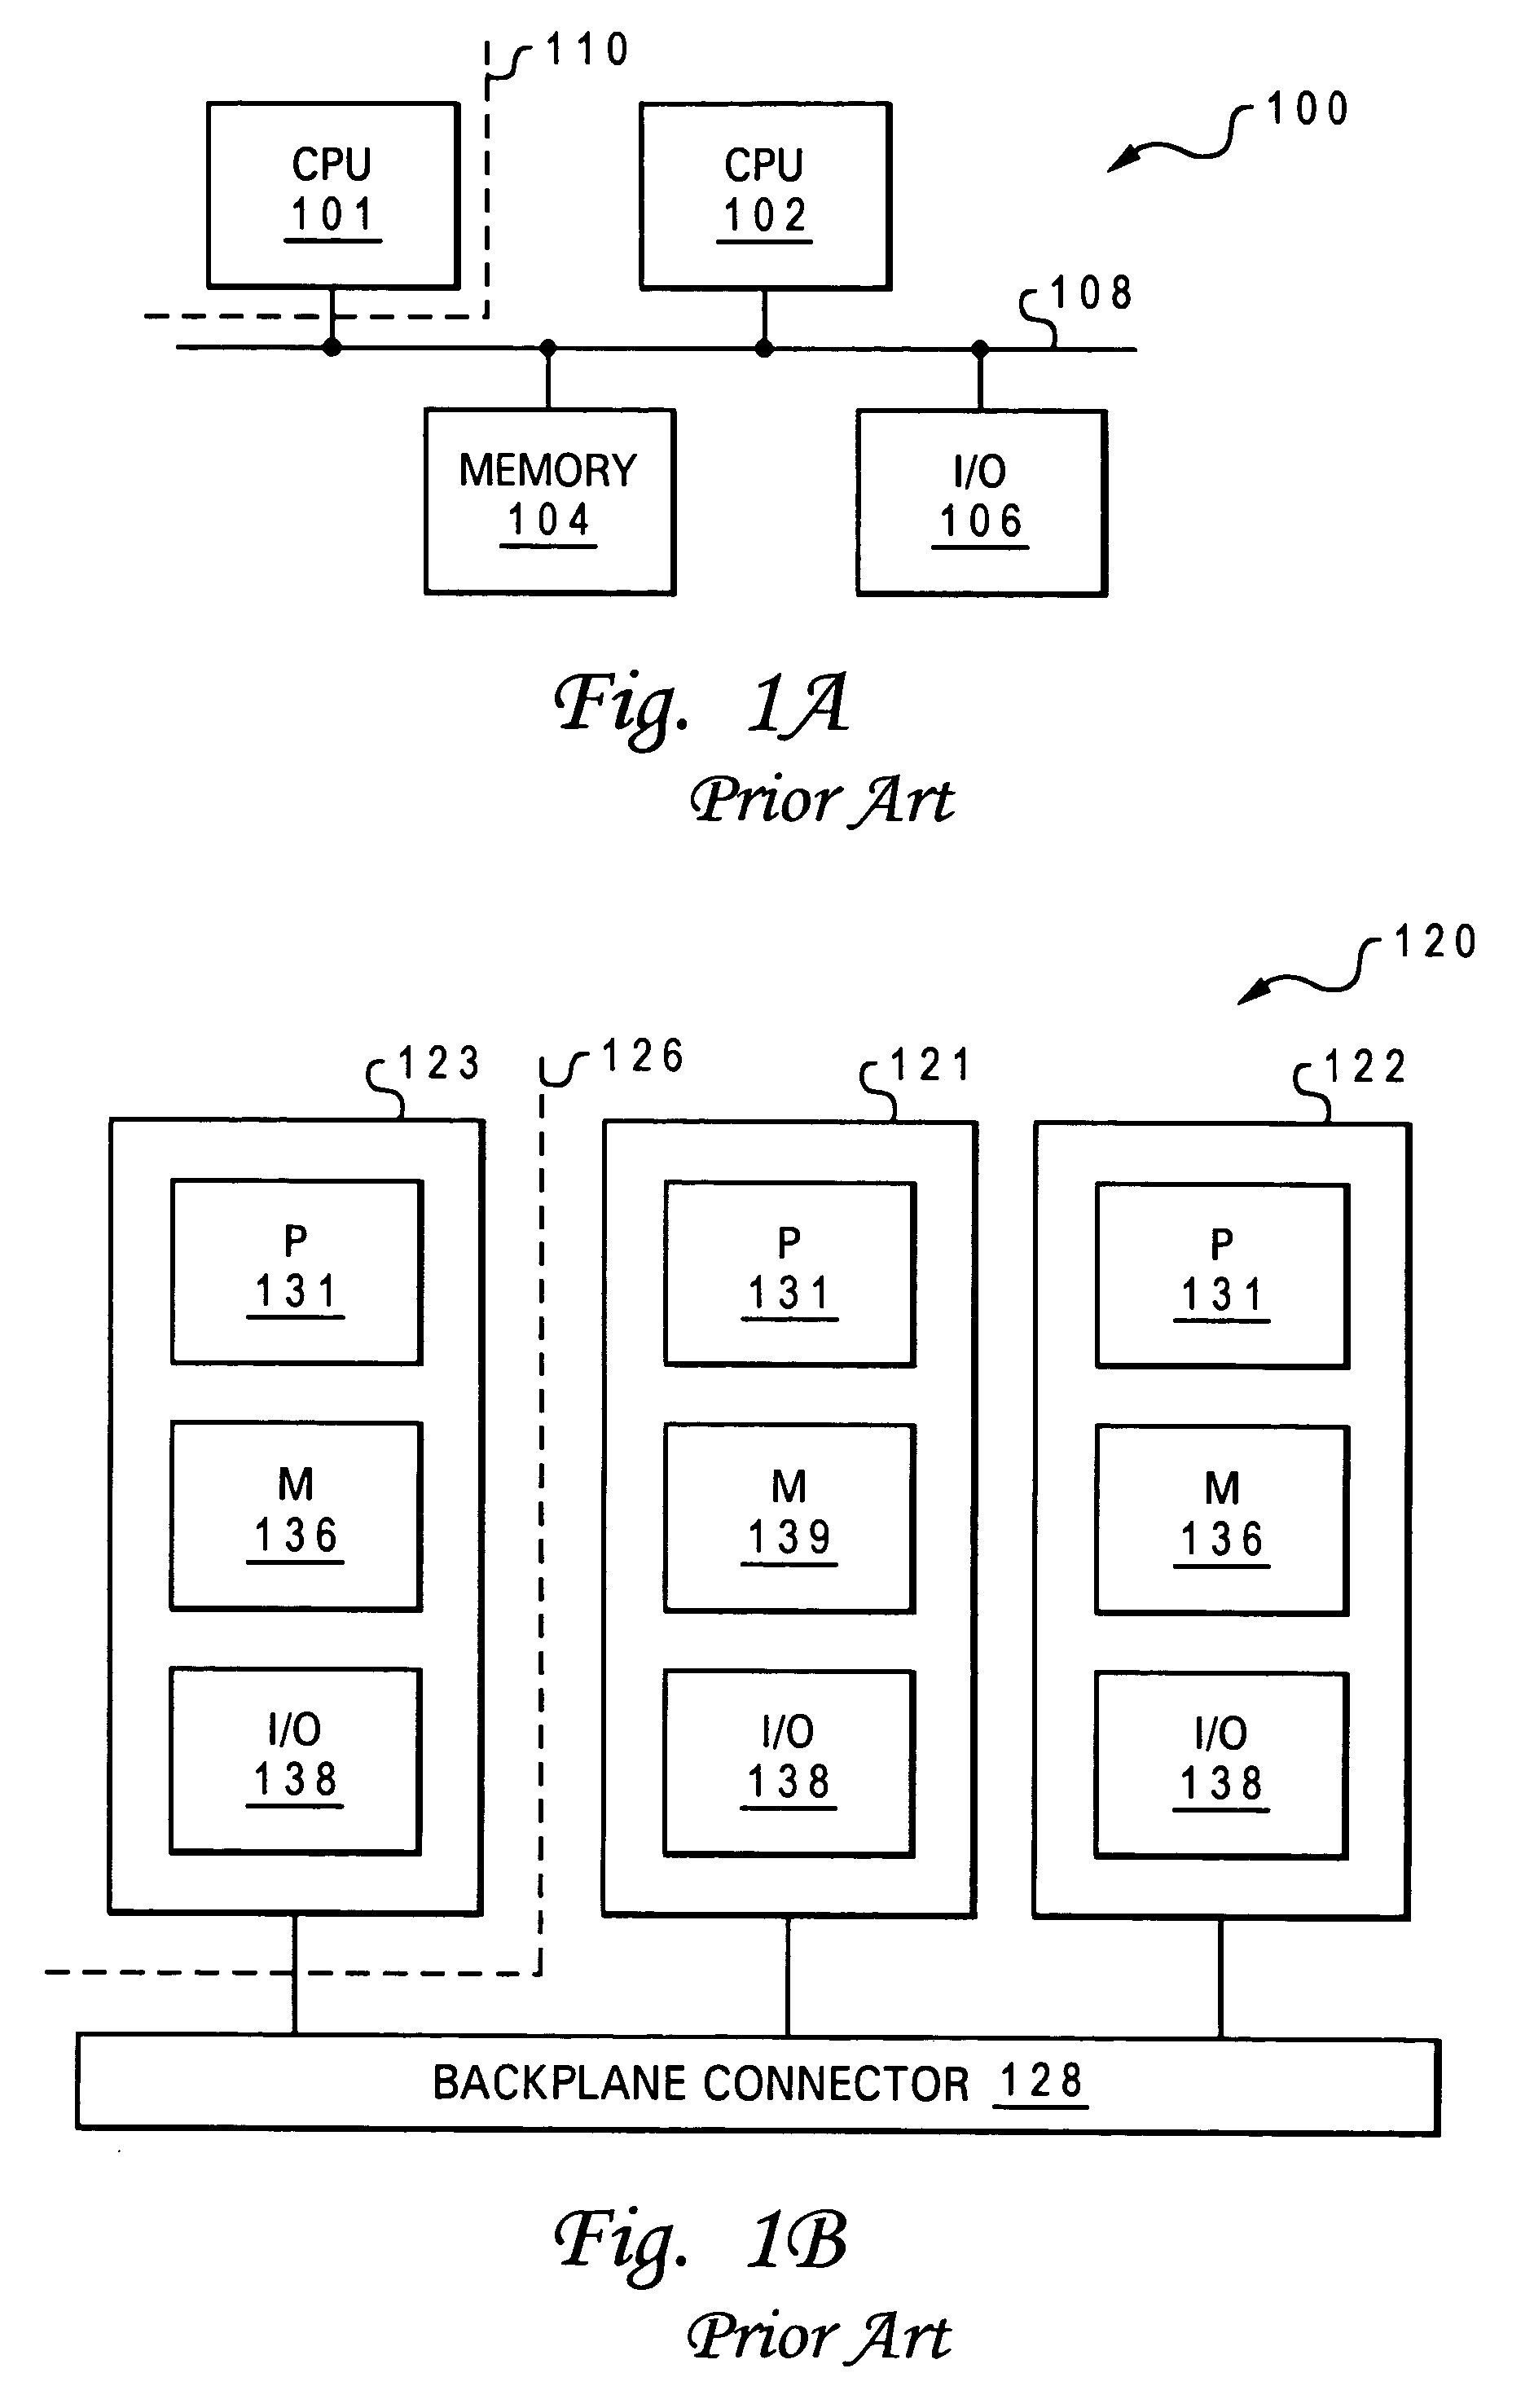 Non-disruptive, dynamic hot-add and hot-remove of non-symmetric data processing system resources